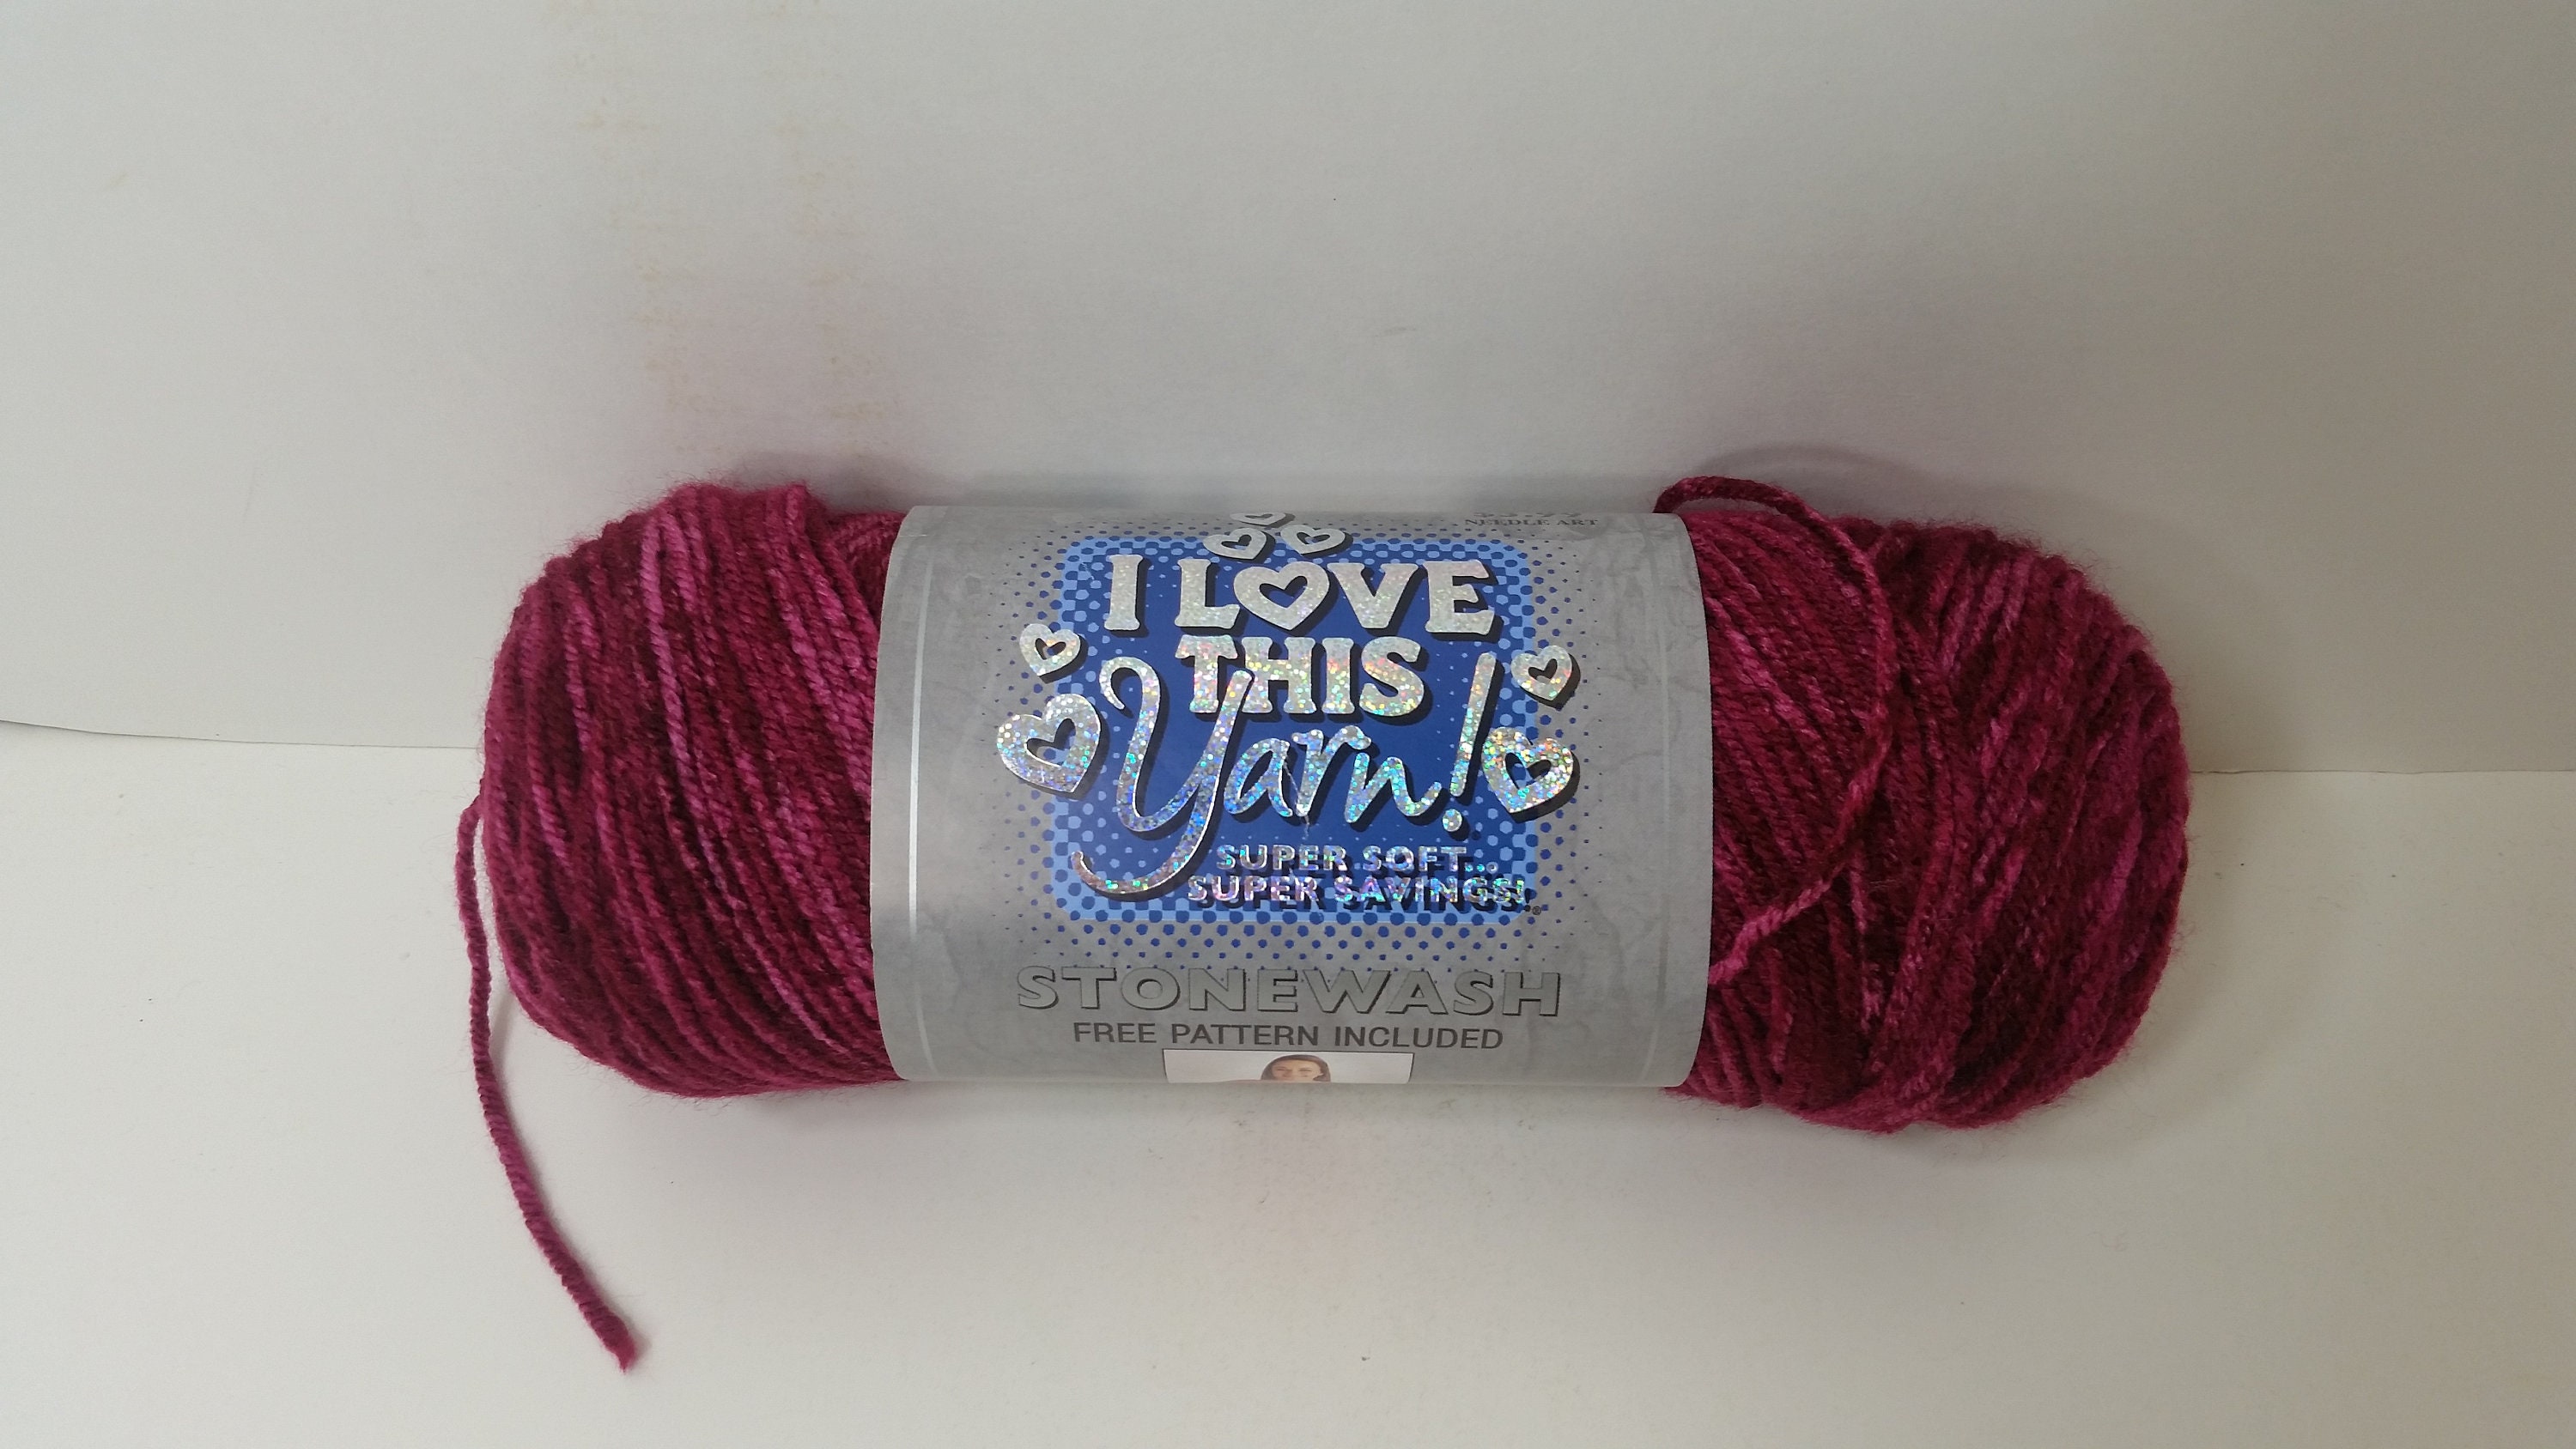 I LOVE THIS Cotton Yarn by Hobby Lobby 15 Skeins, $32.00 - PicClick